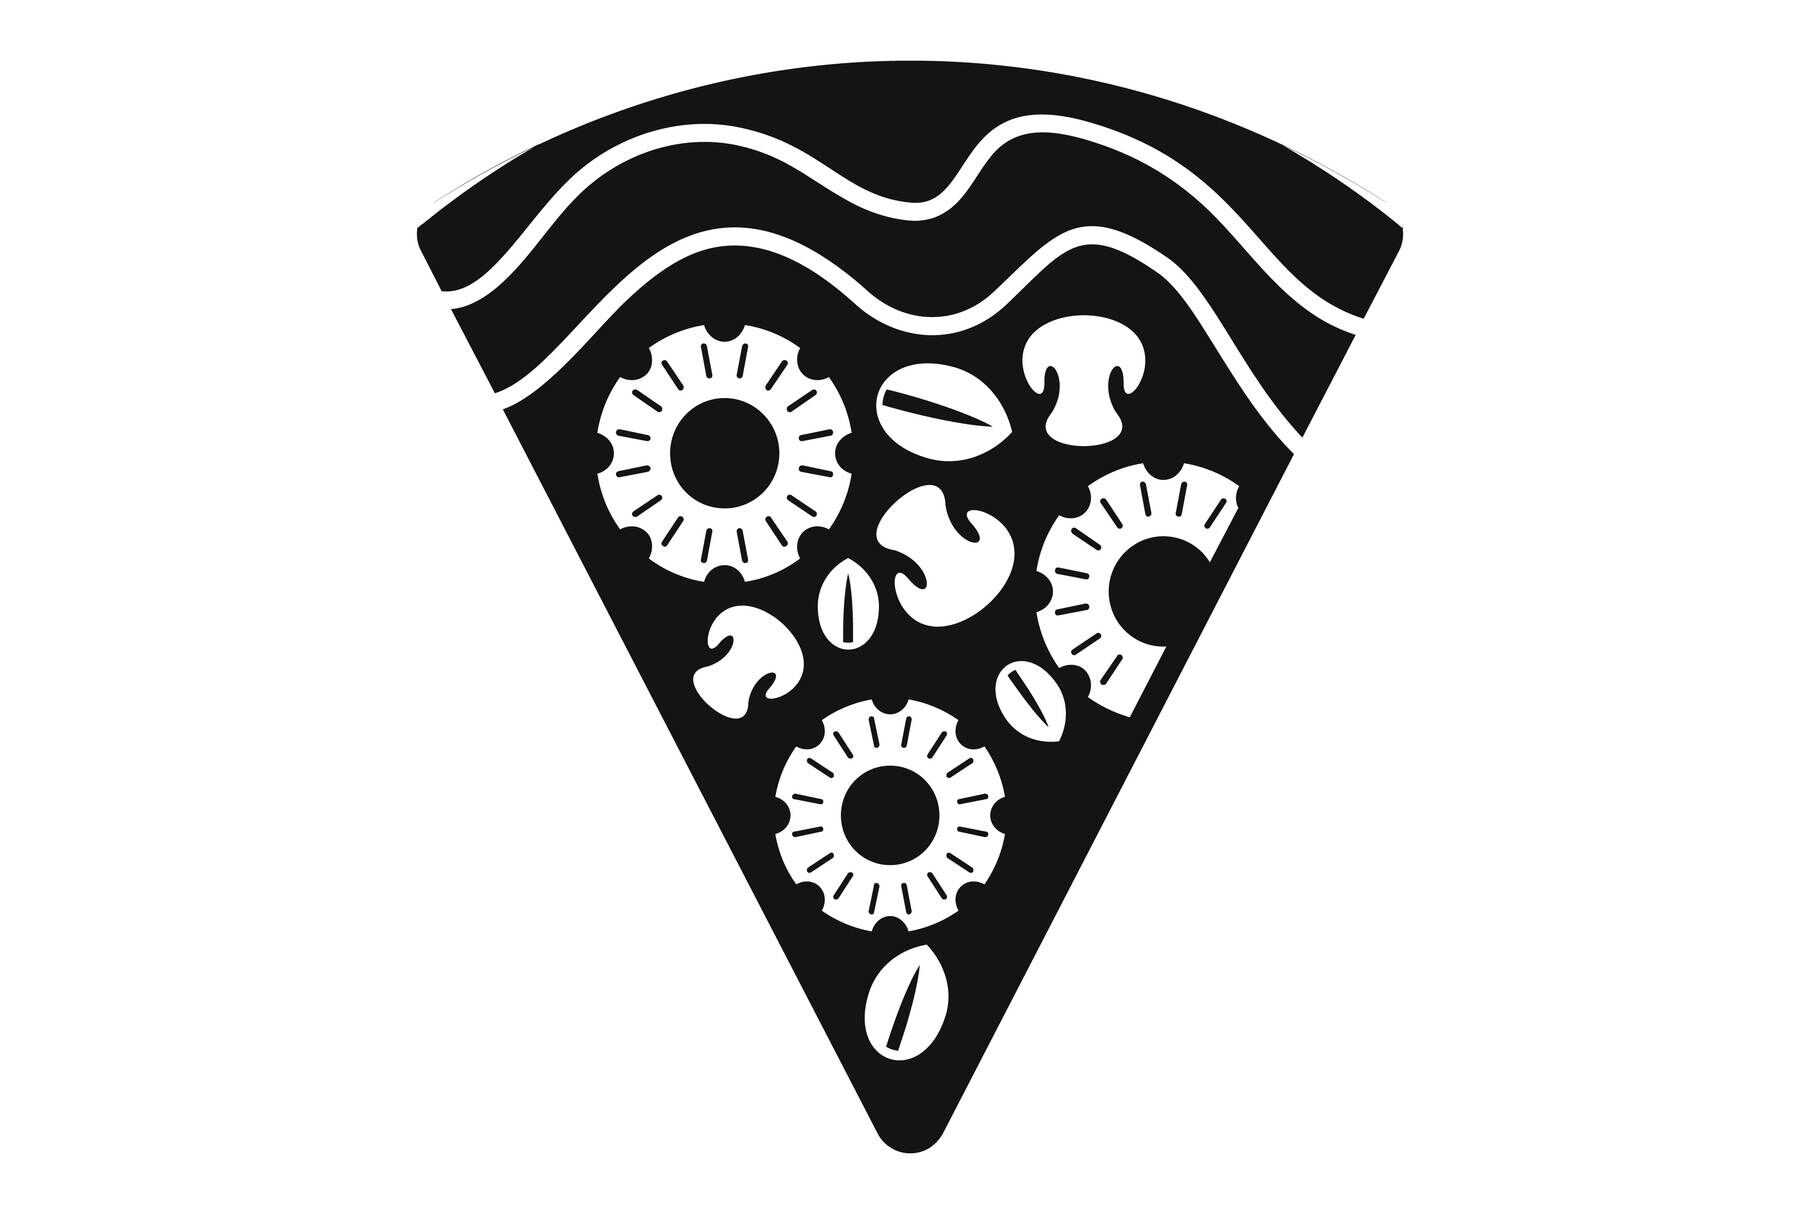 cheese pizza icon